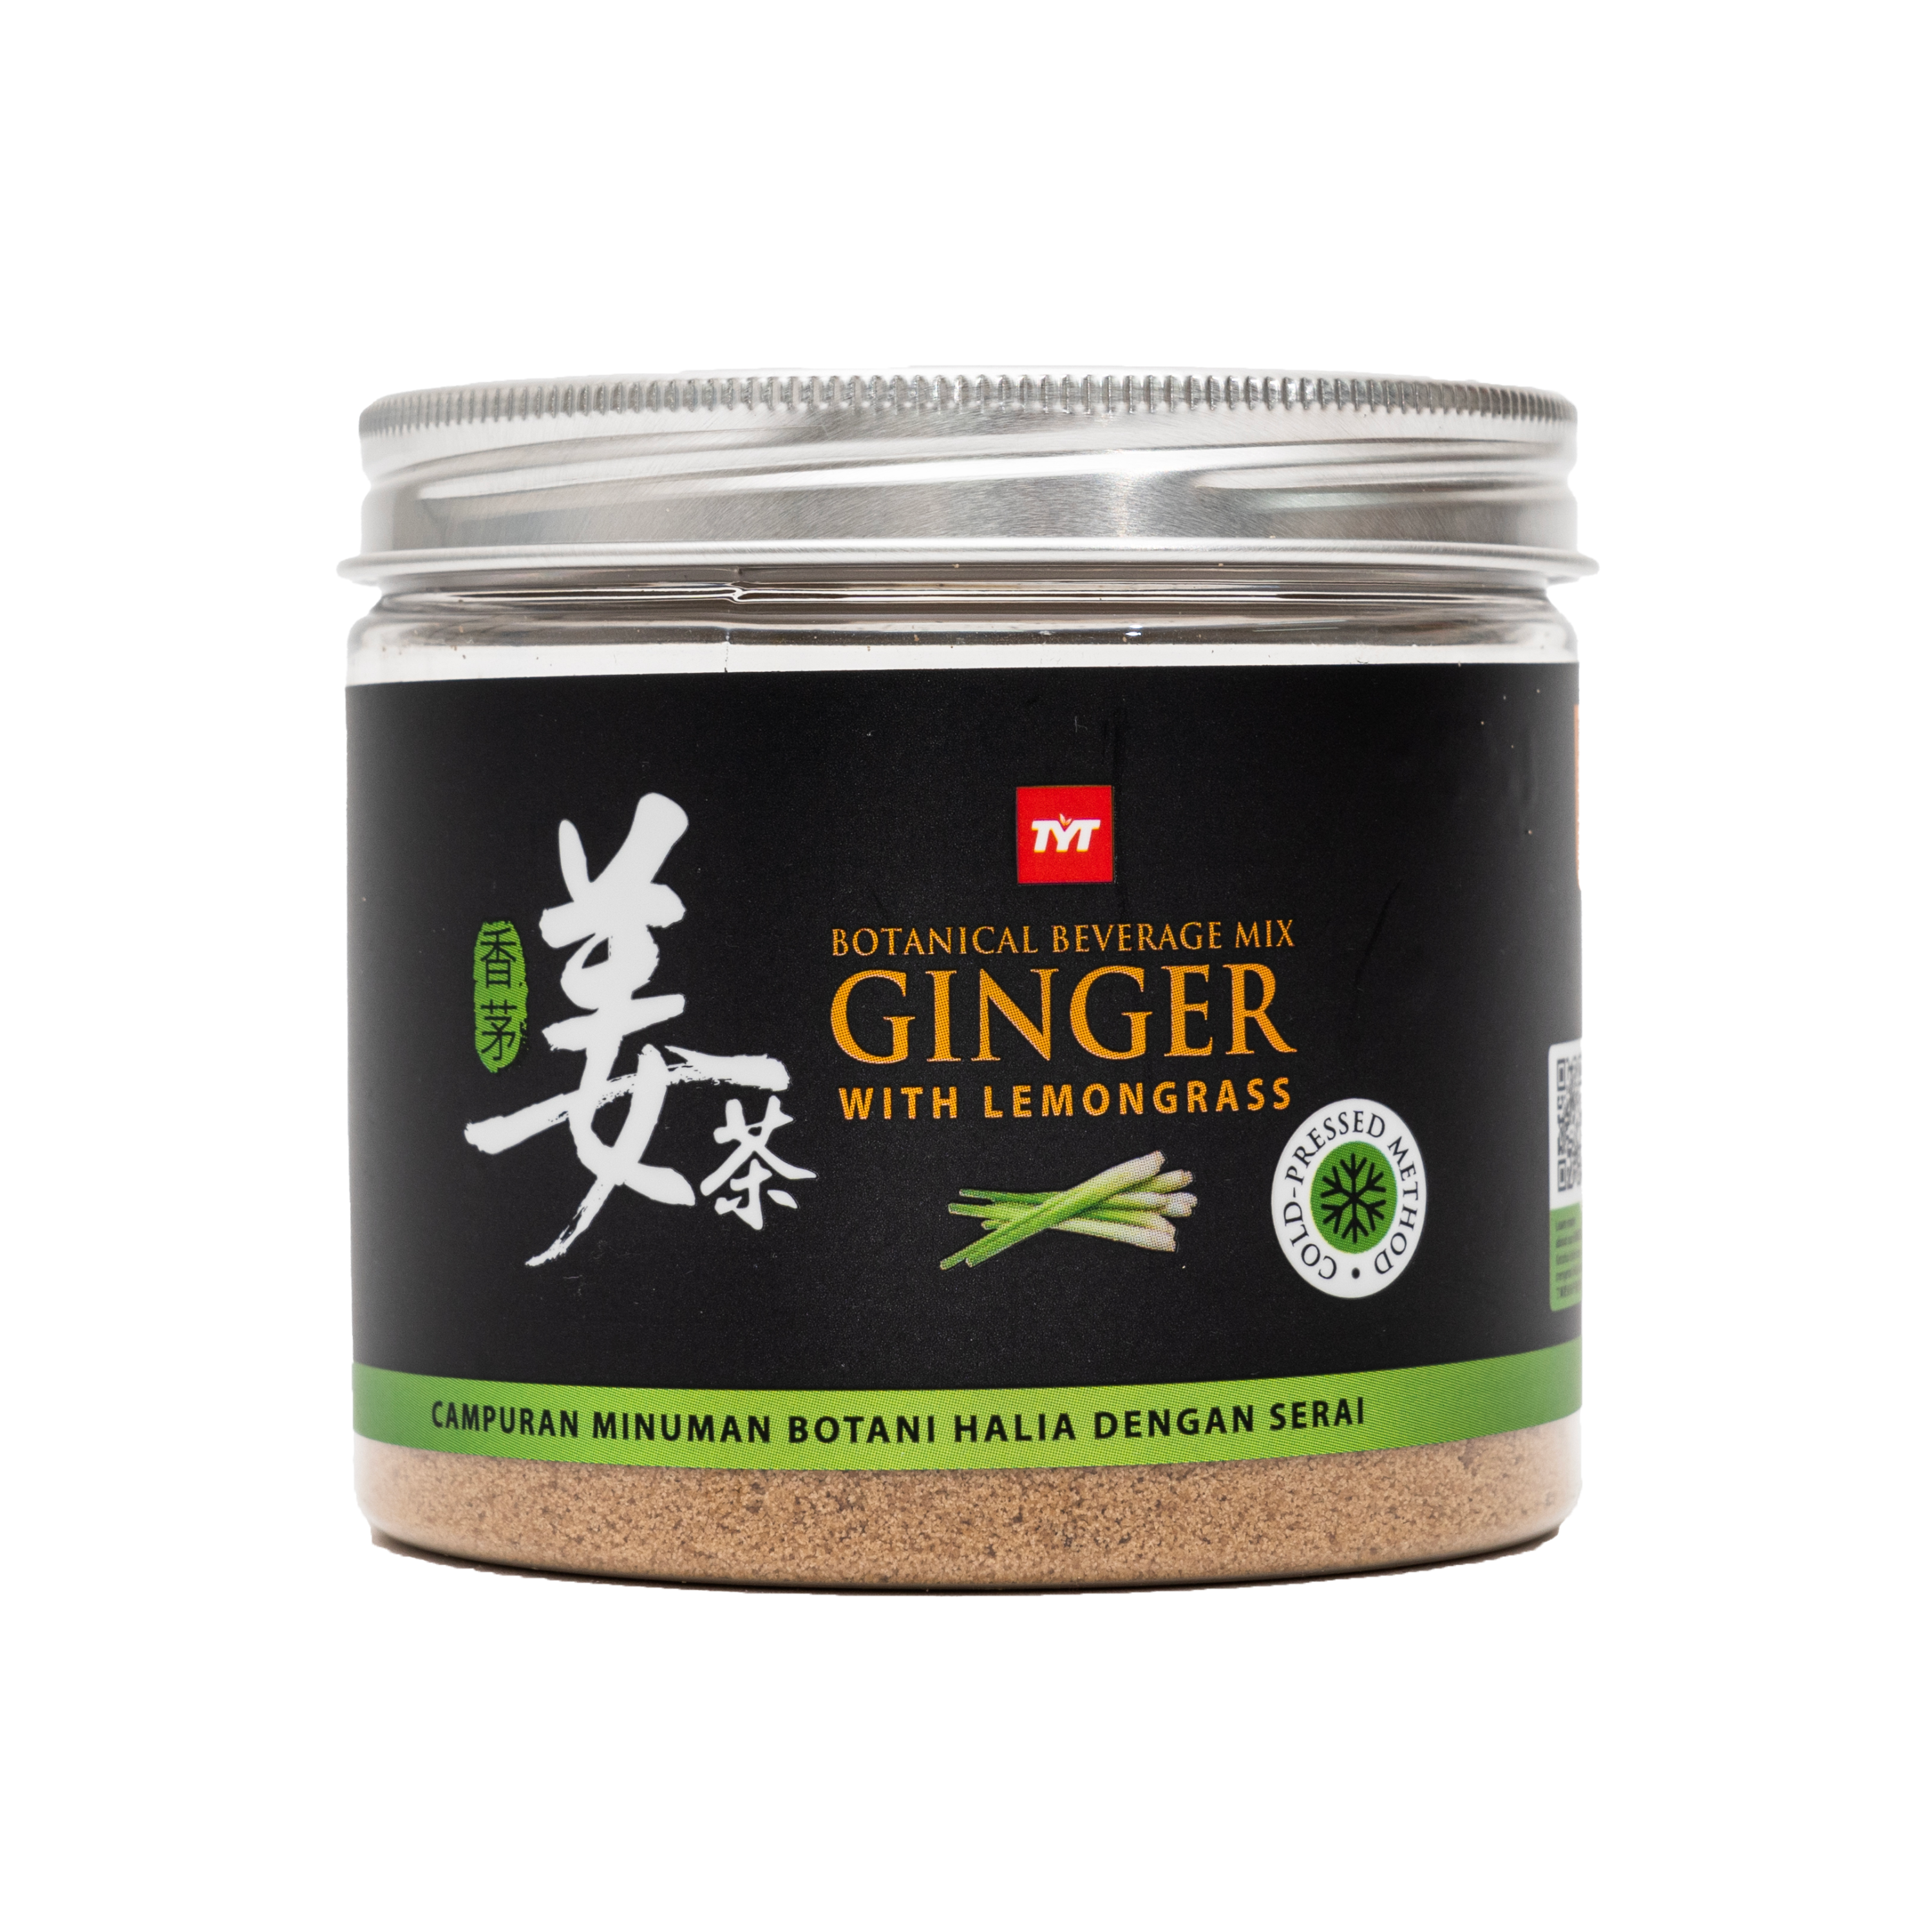 Cold-Pressed ginger with Lemongrass